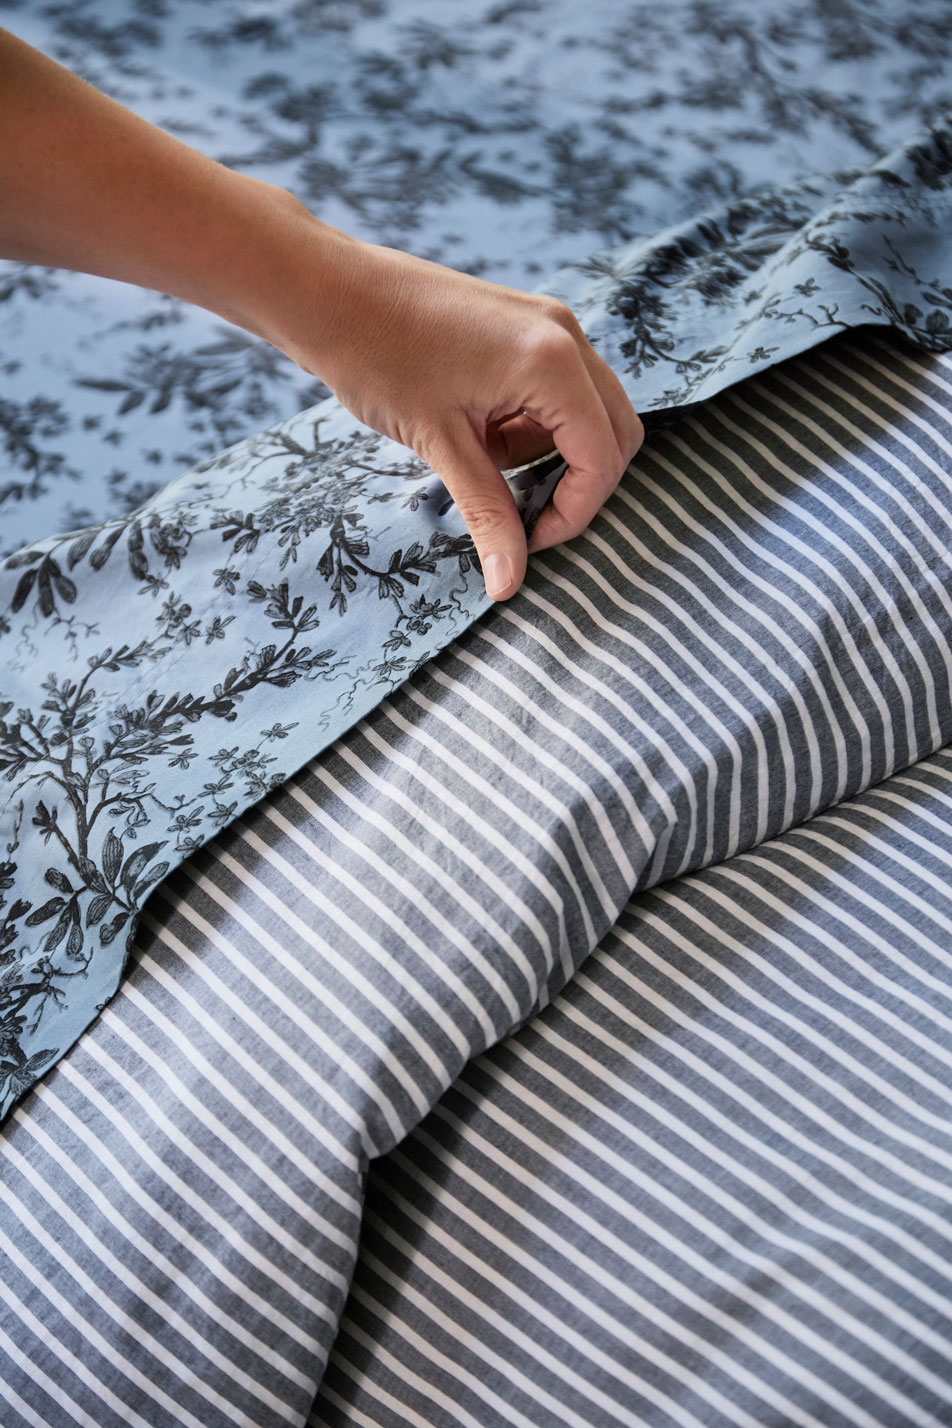 A close-up of a woman's hand making a bed. The bed has floral sheets and a striped quilt cover.